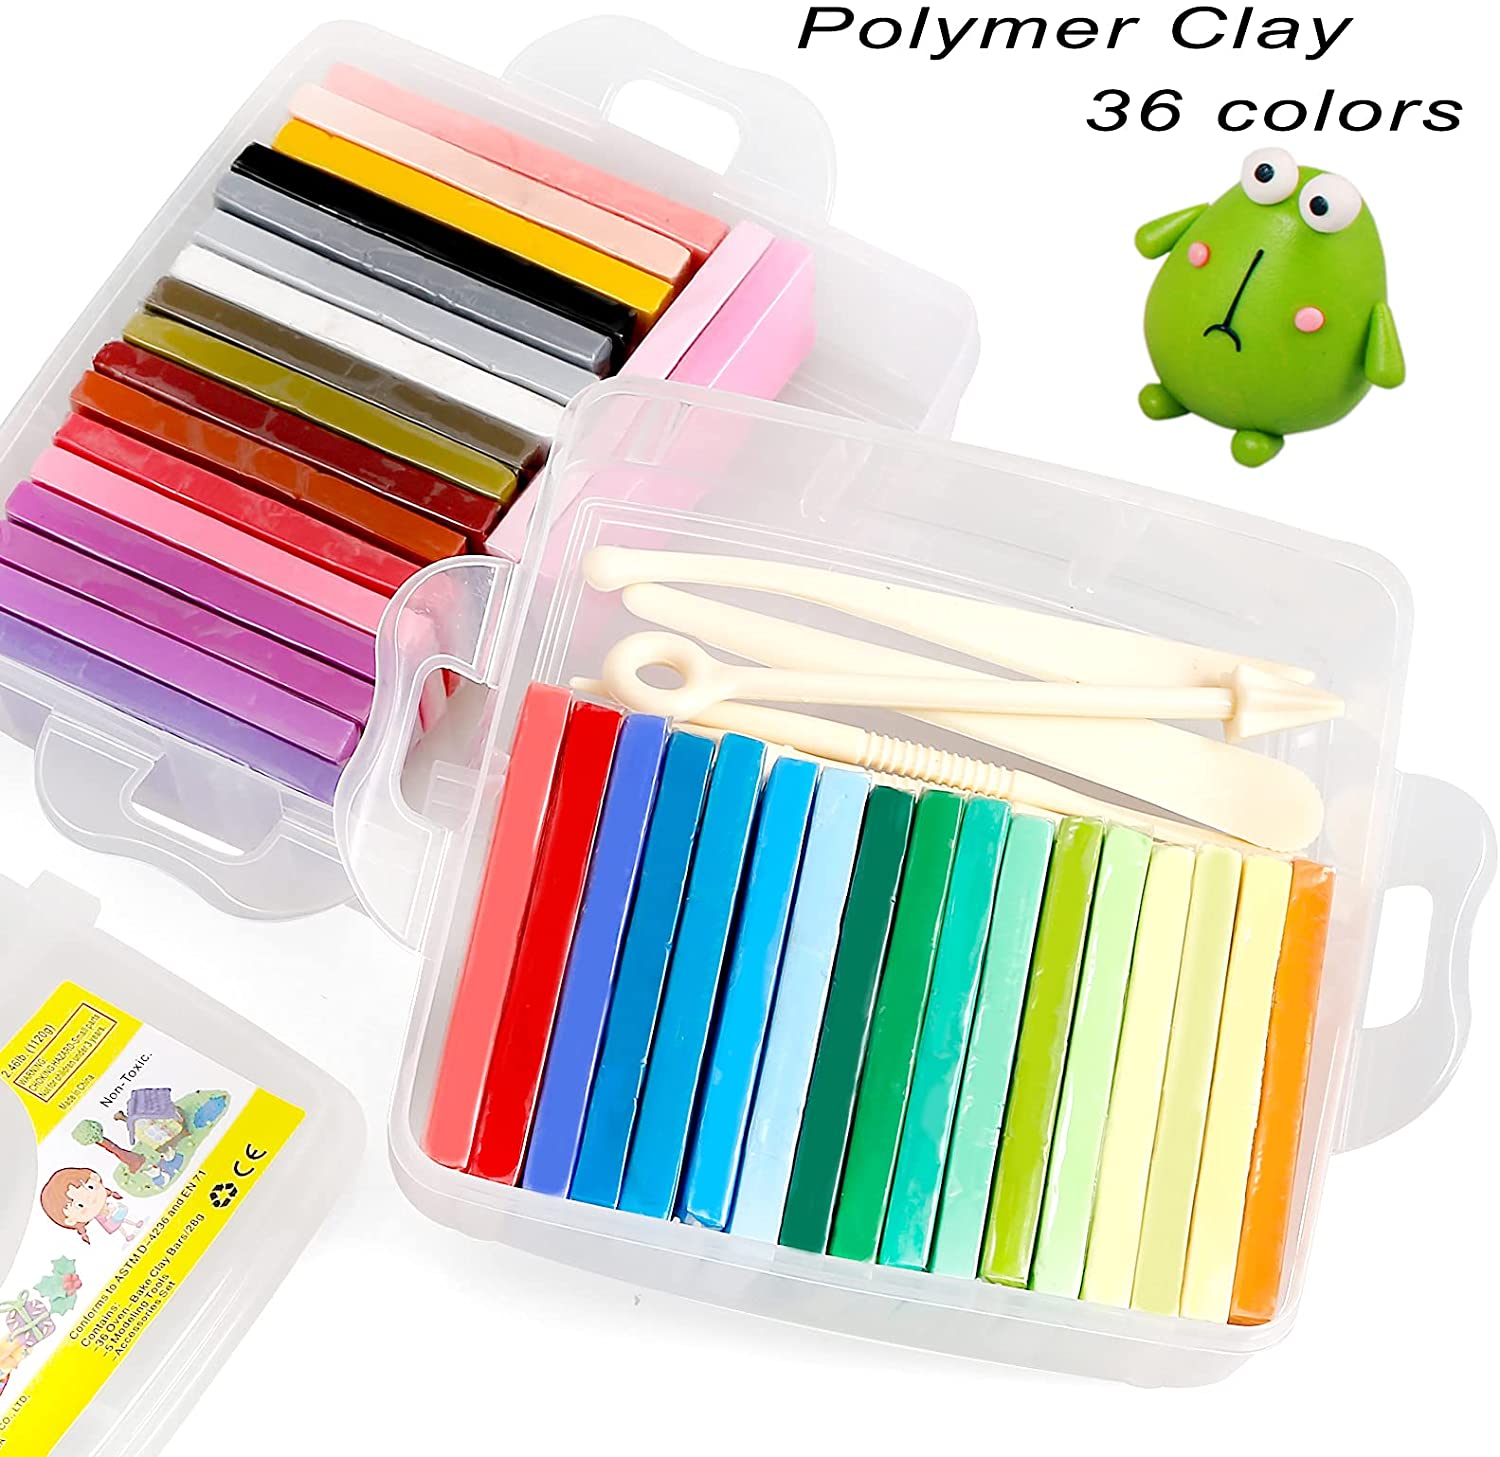 Polymer Clay Starter Kit, 24 Colors Oven Bake Clay, Safe & Non